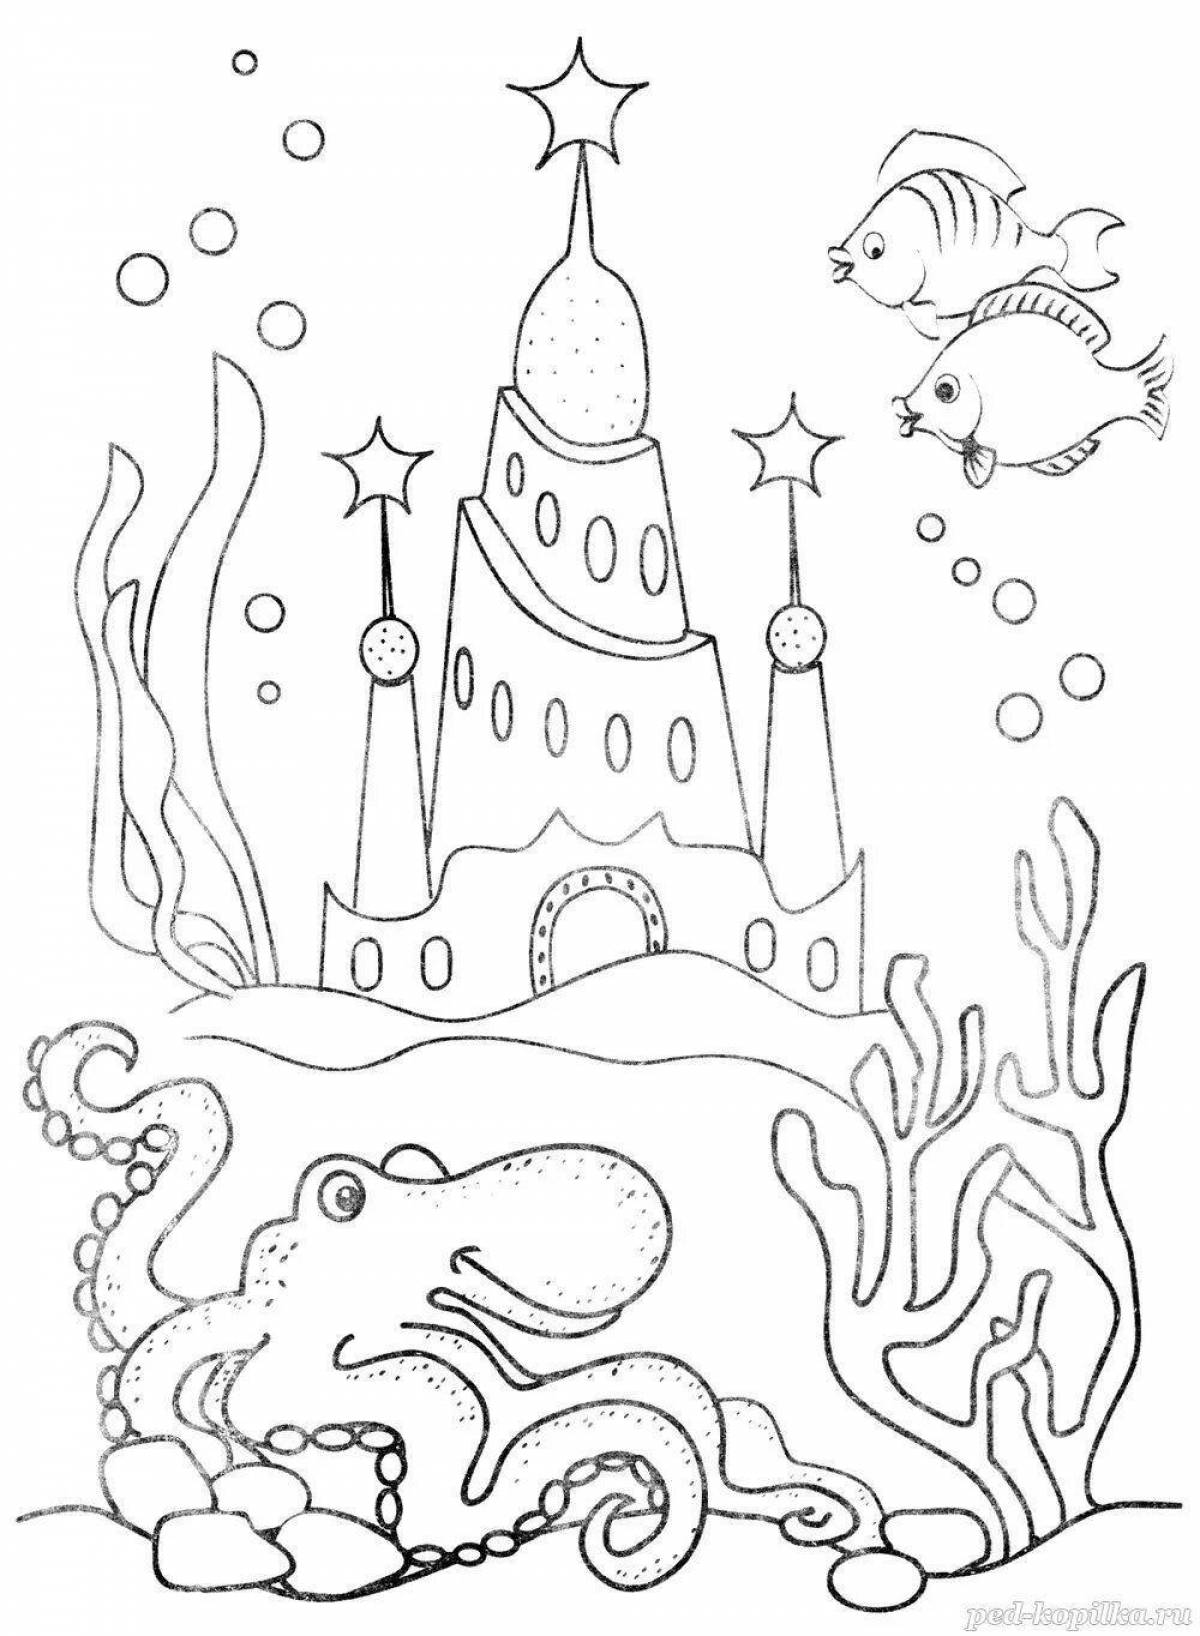 Colorful fairytale kingdom coloring book for kids